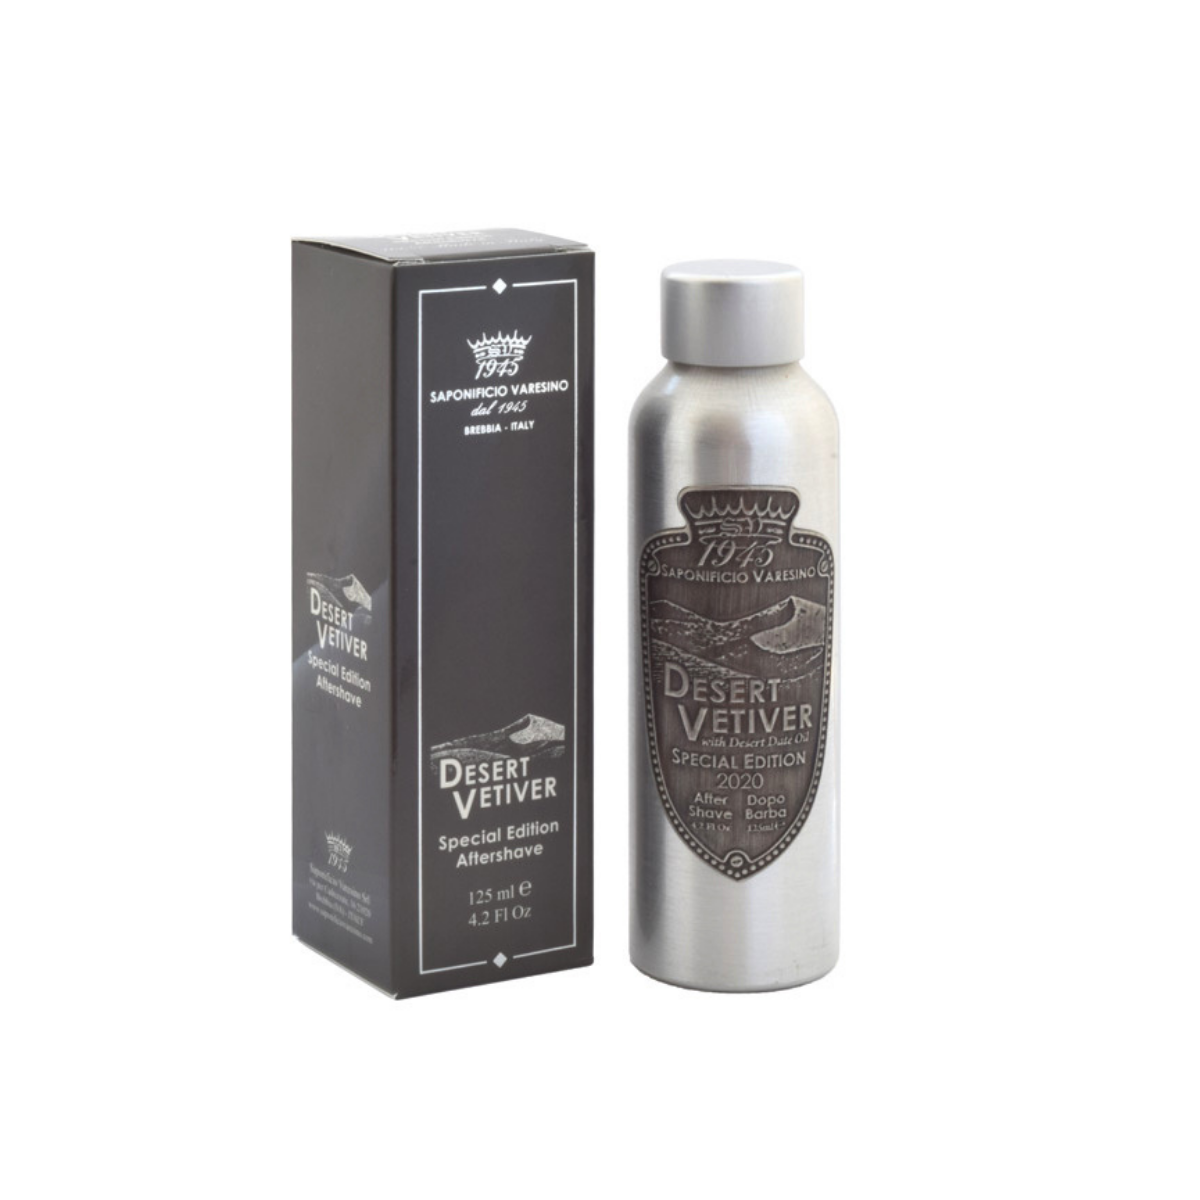 Primary Image of Desert Vetiver Aftershave